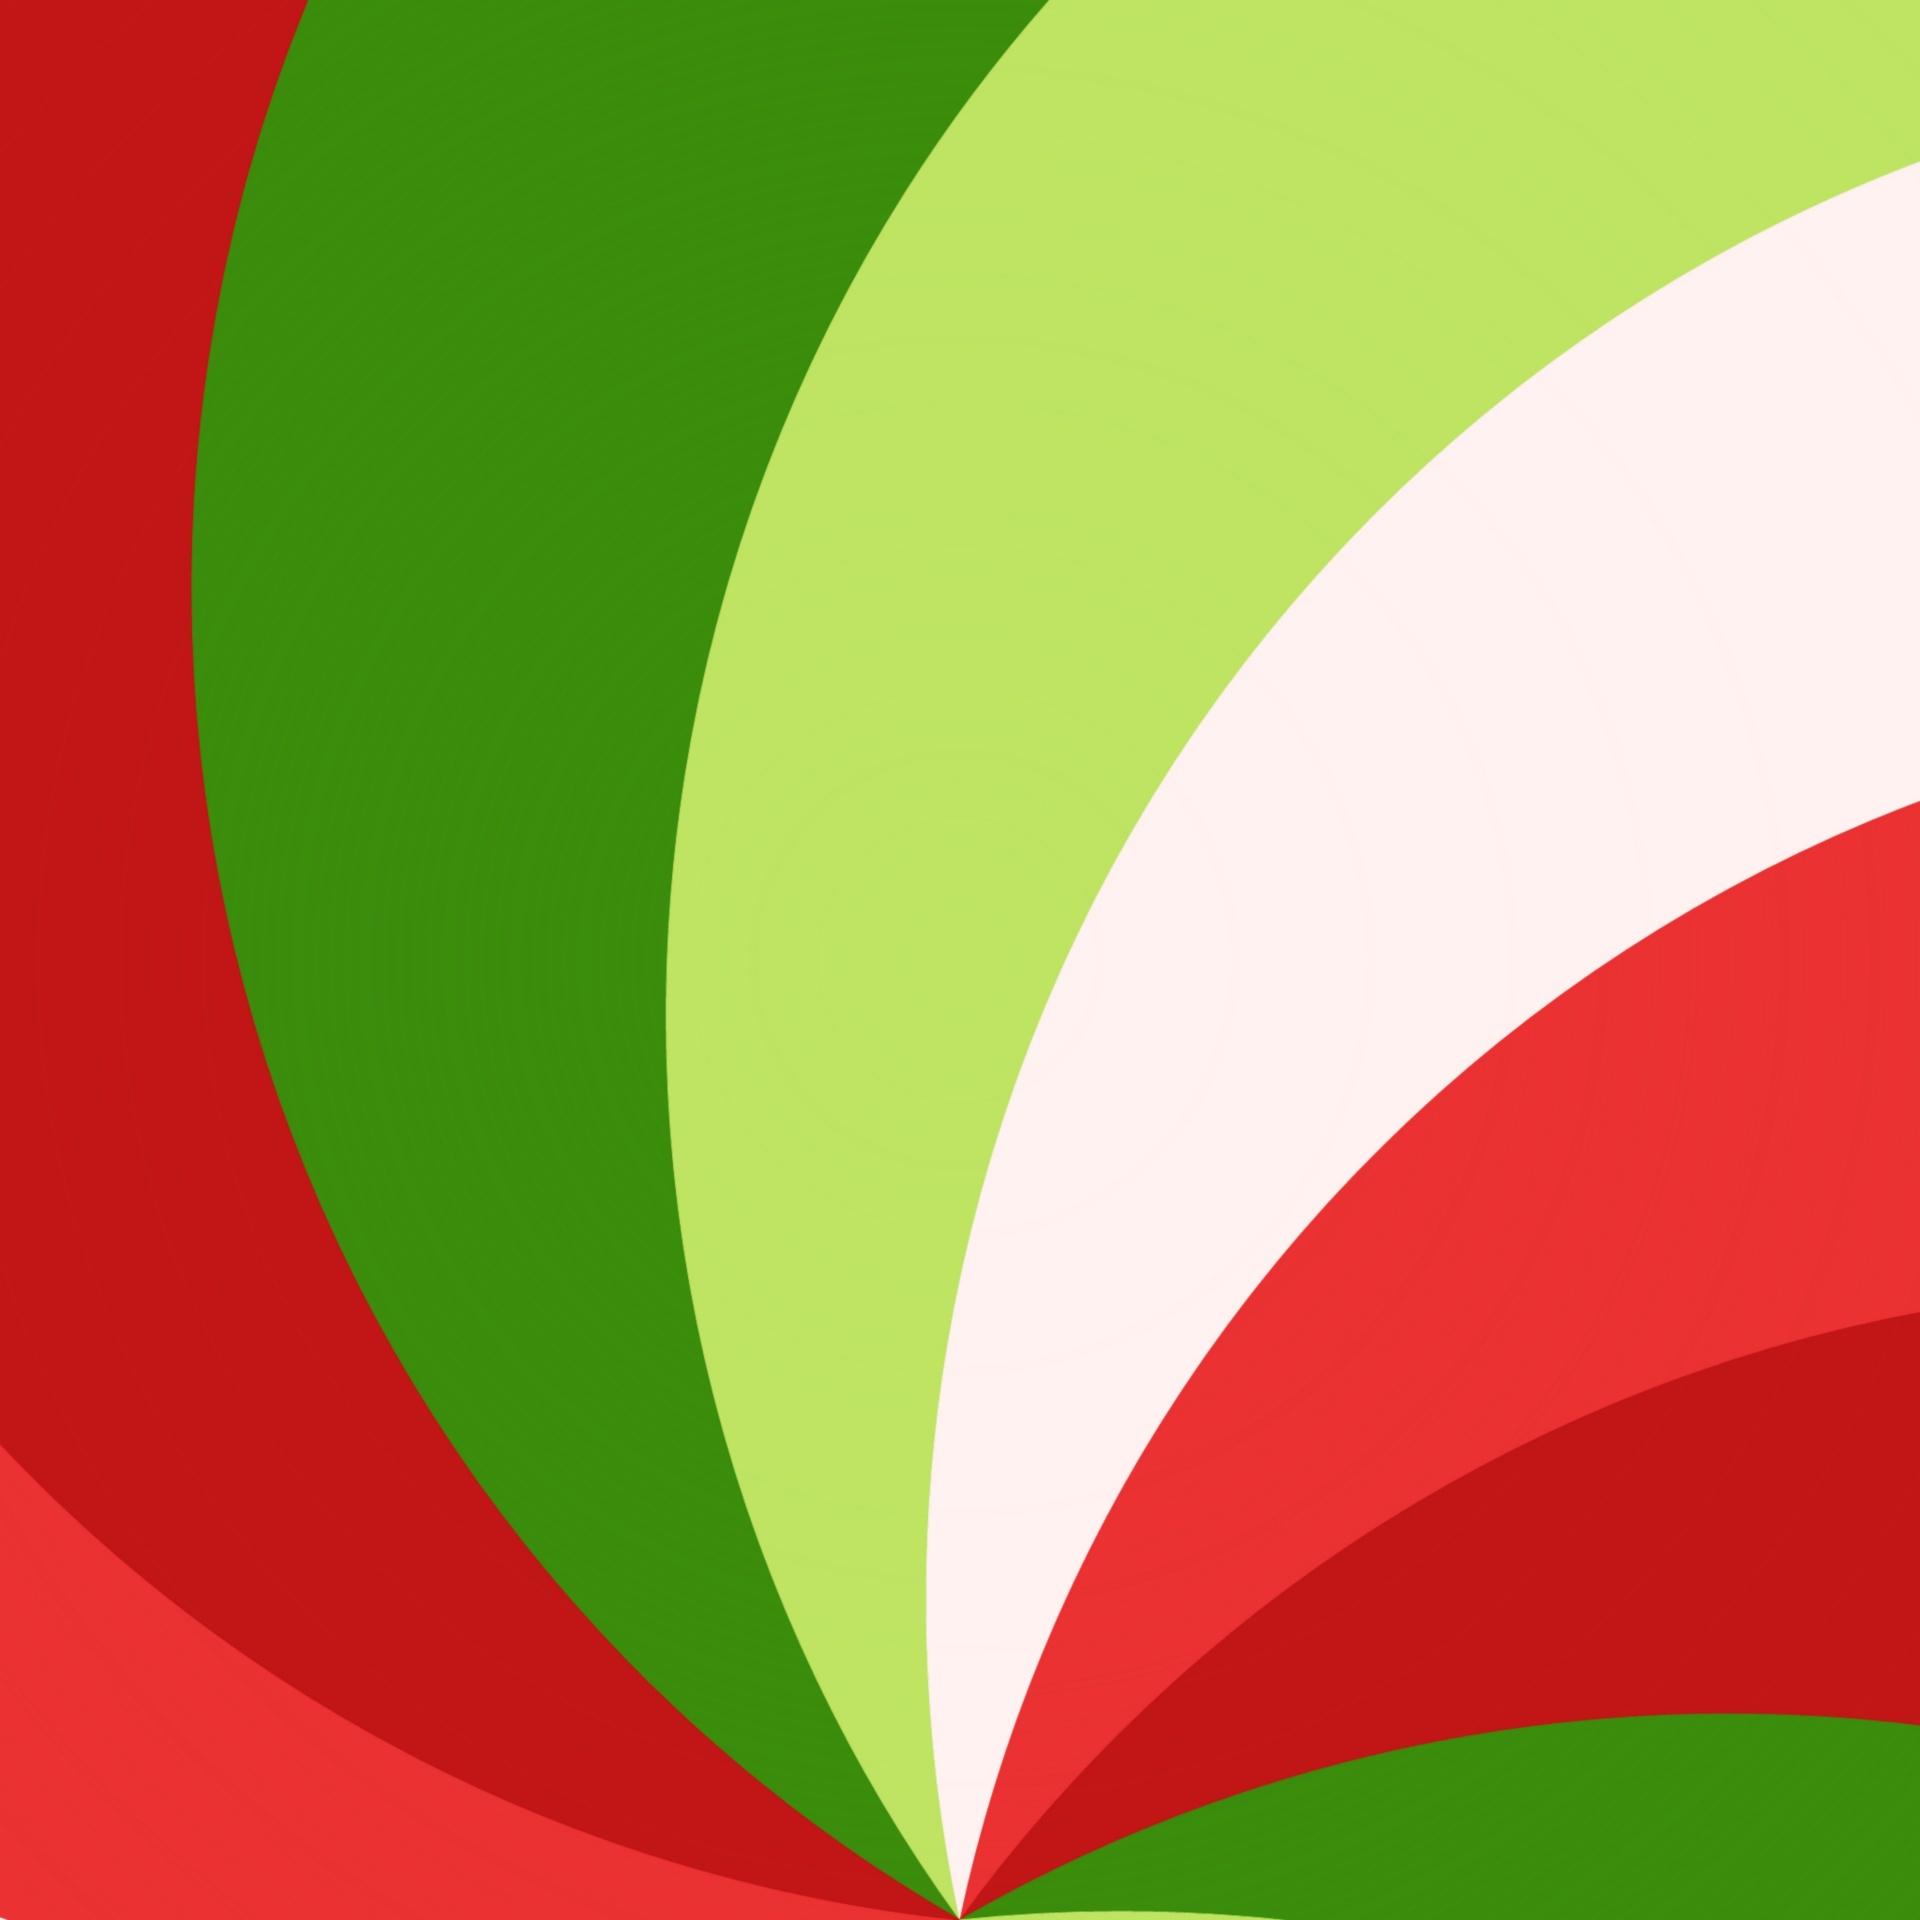 color,swirl,stripes,red,green,white,shape,geometric,lines,art,abstract,wallpaper,background,color stripes 11,free pictures, free photos, free images, royalty free, free illustrations, public domain